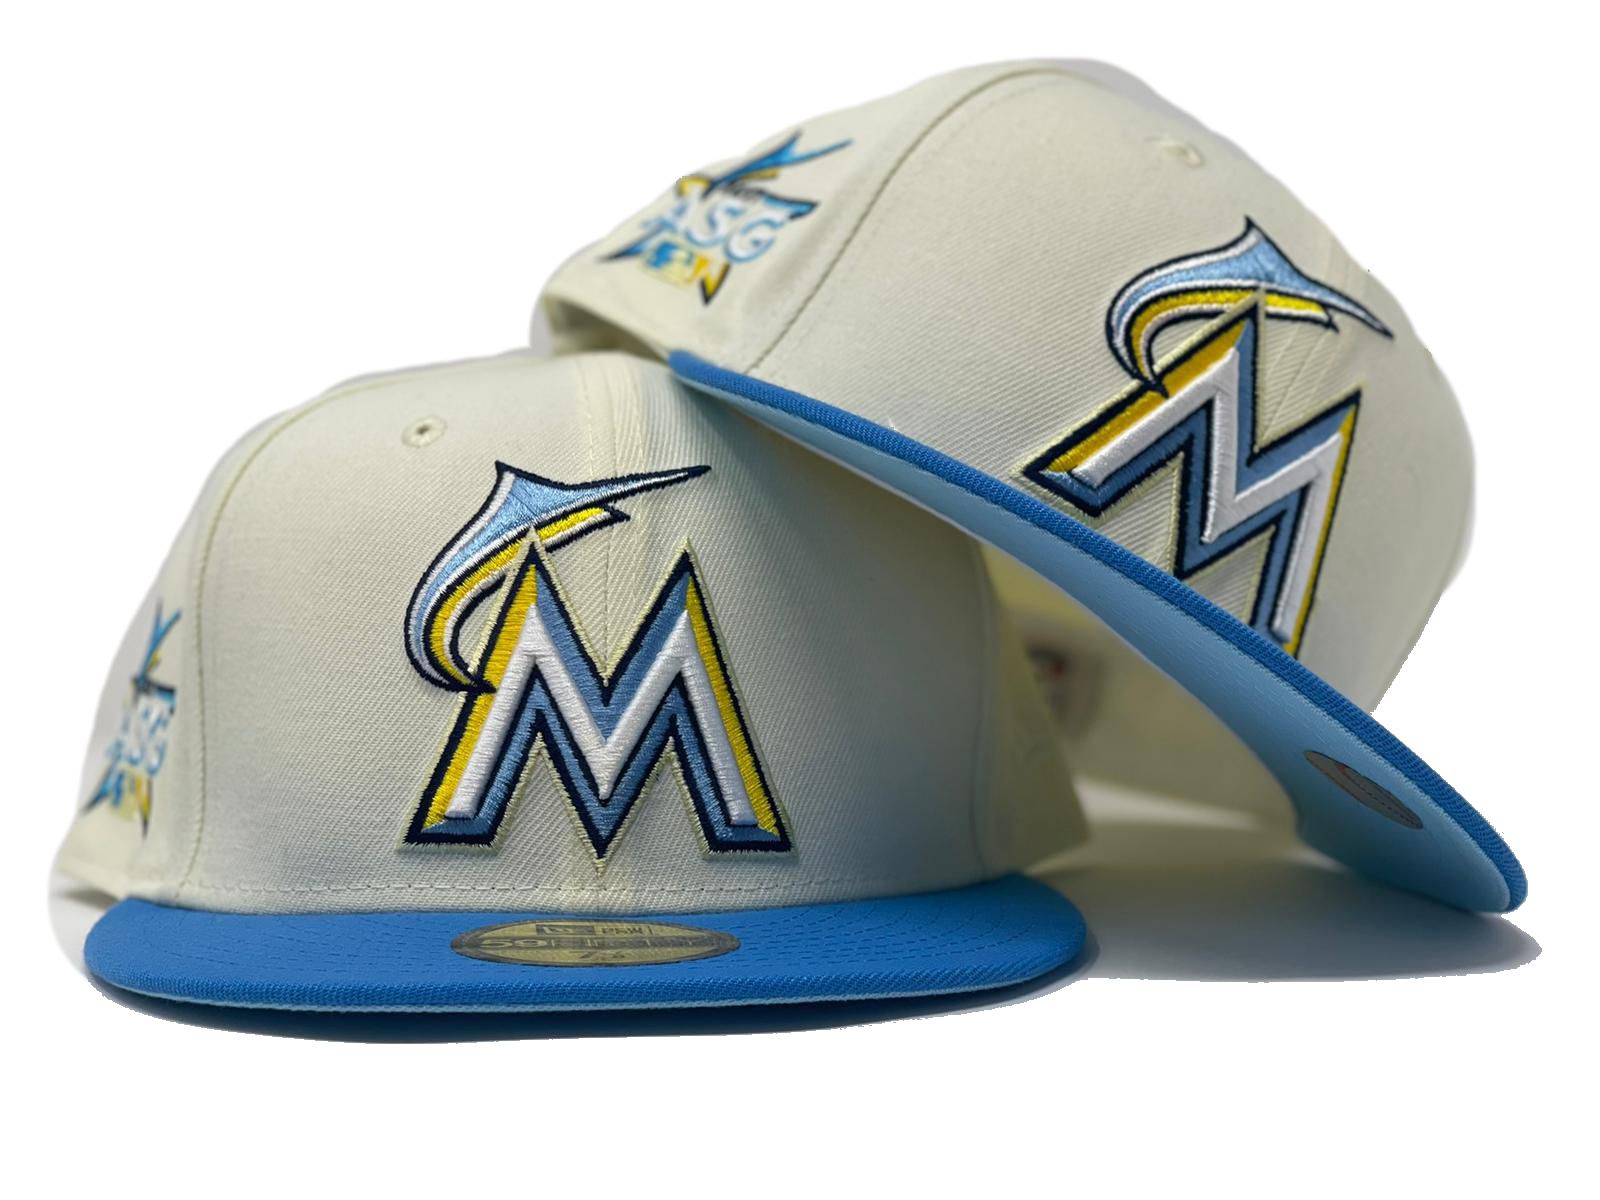 Miami Marlins (Florida Marlins) 2017 Official All Star Game Cap for Sale in  Miami, FL - OfferUp